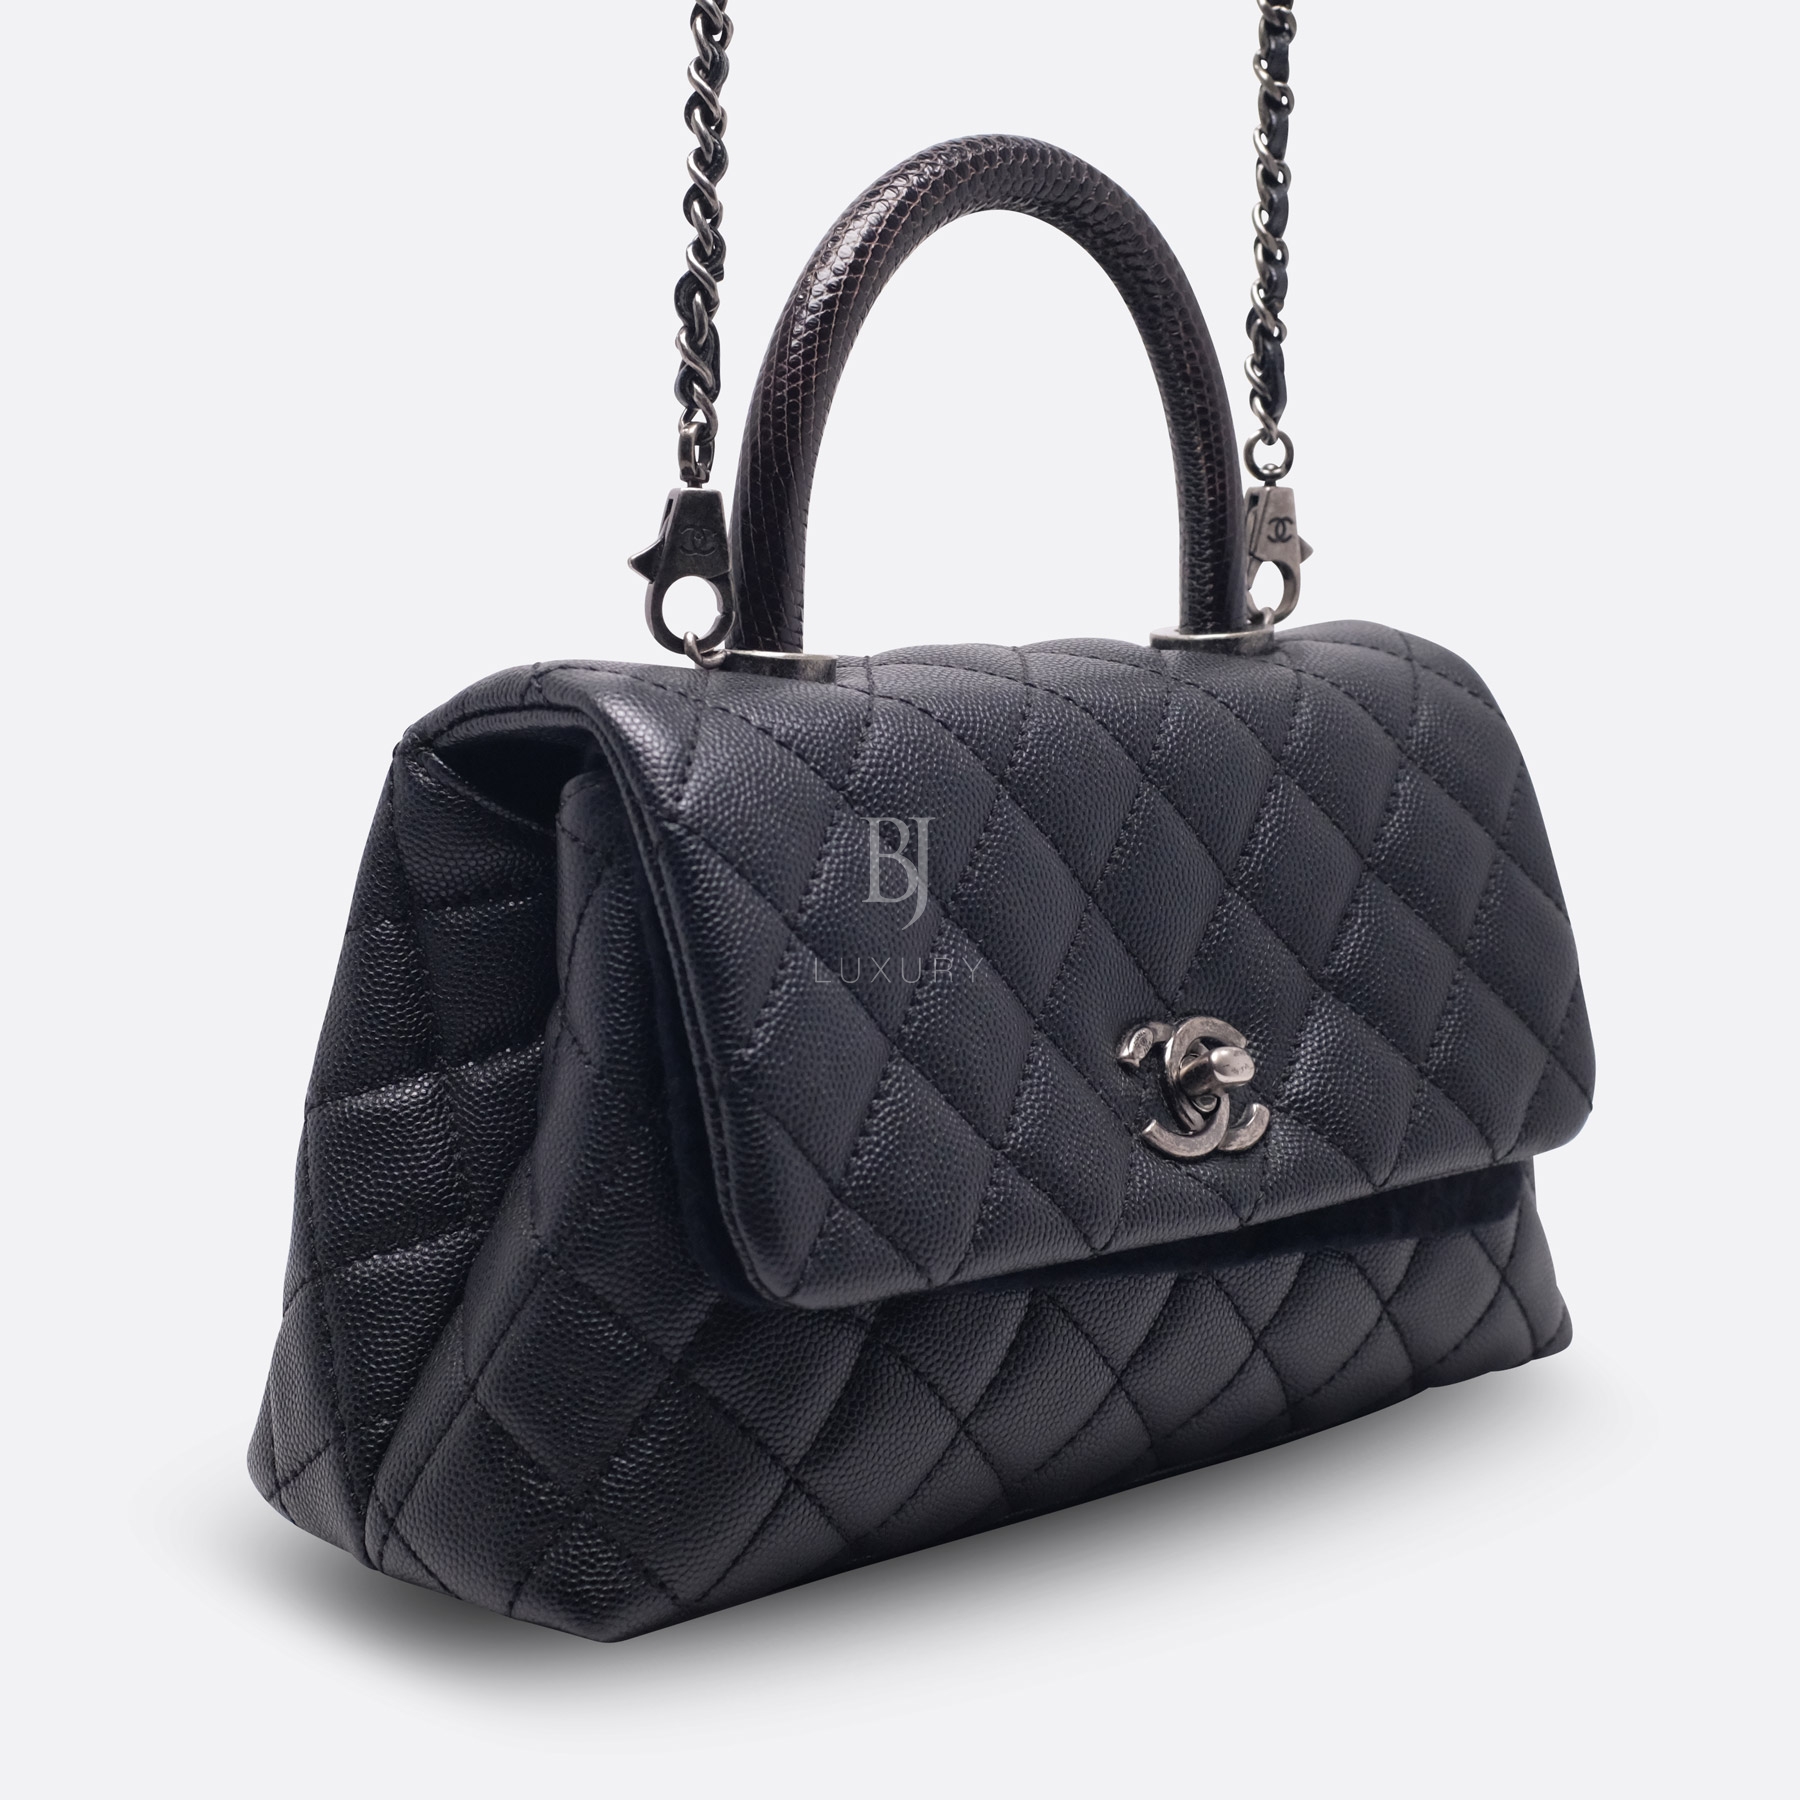 Chanel Coco Handle Bag With Lizard-Embossed Handle, What Has Changed?